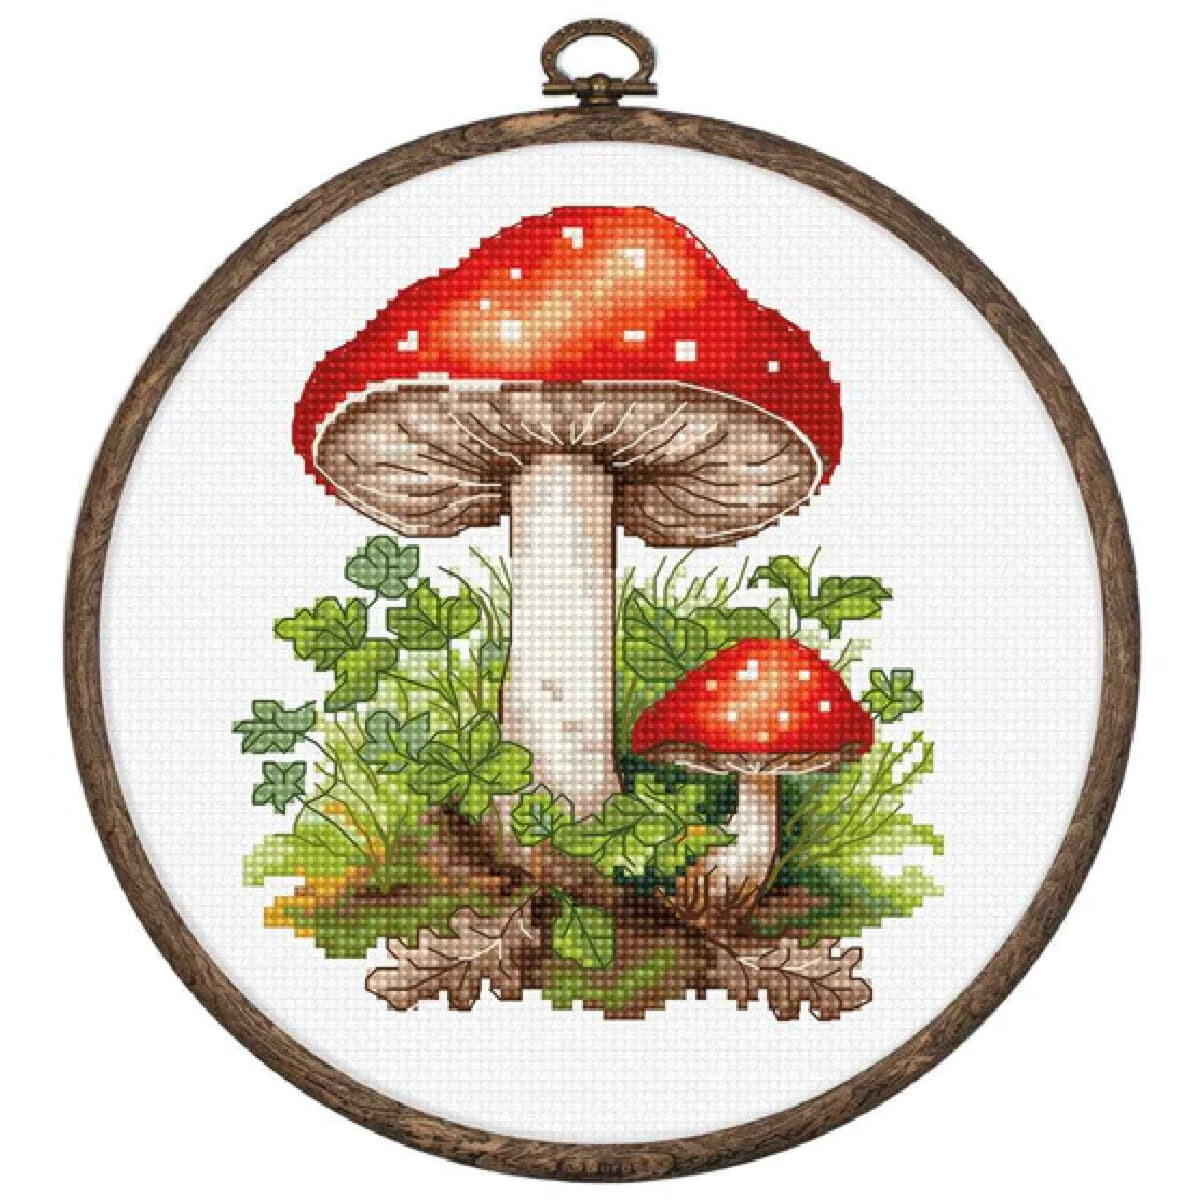 Luca-S counted cross stitch kit with hoop "Amanita...